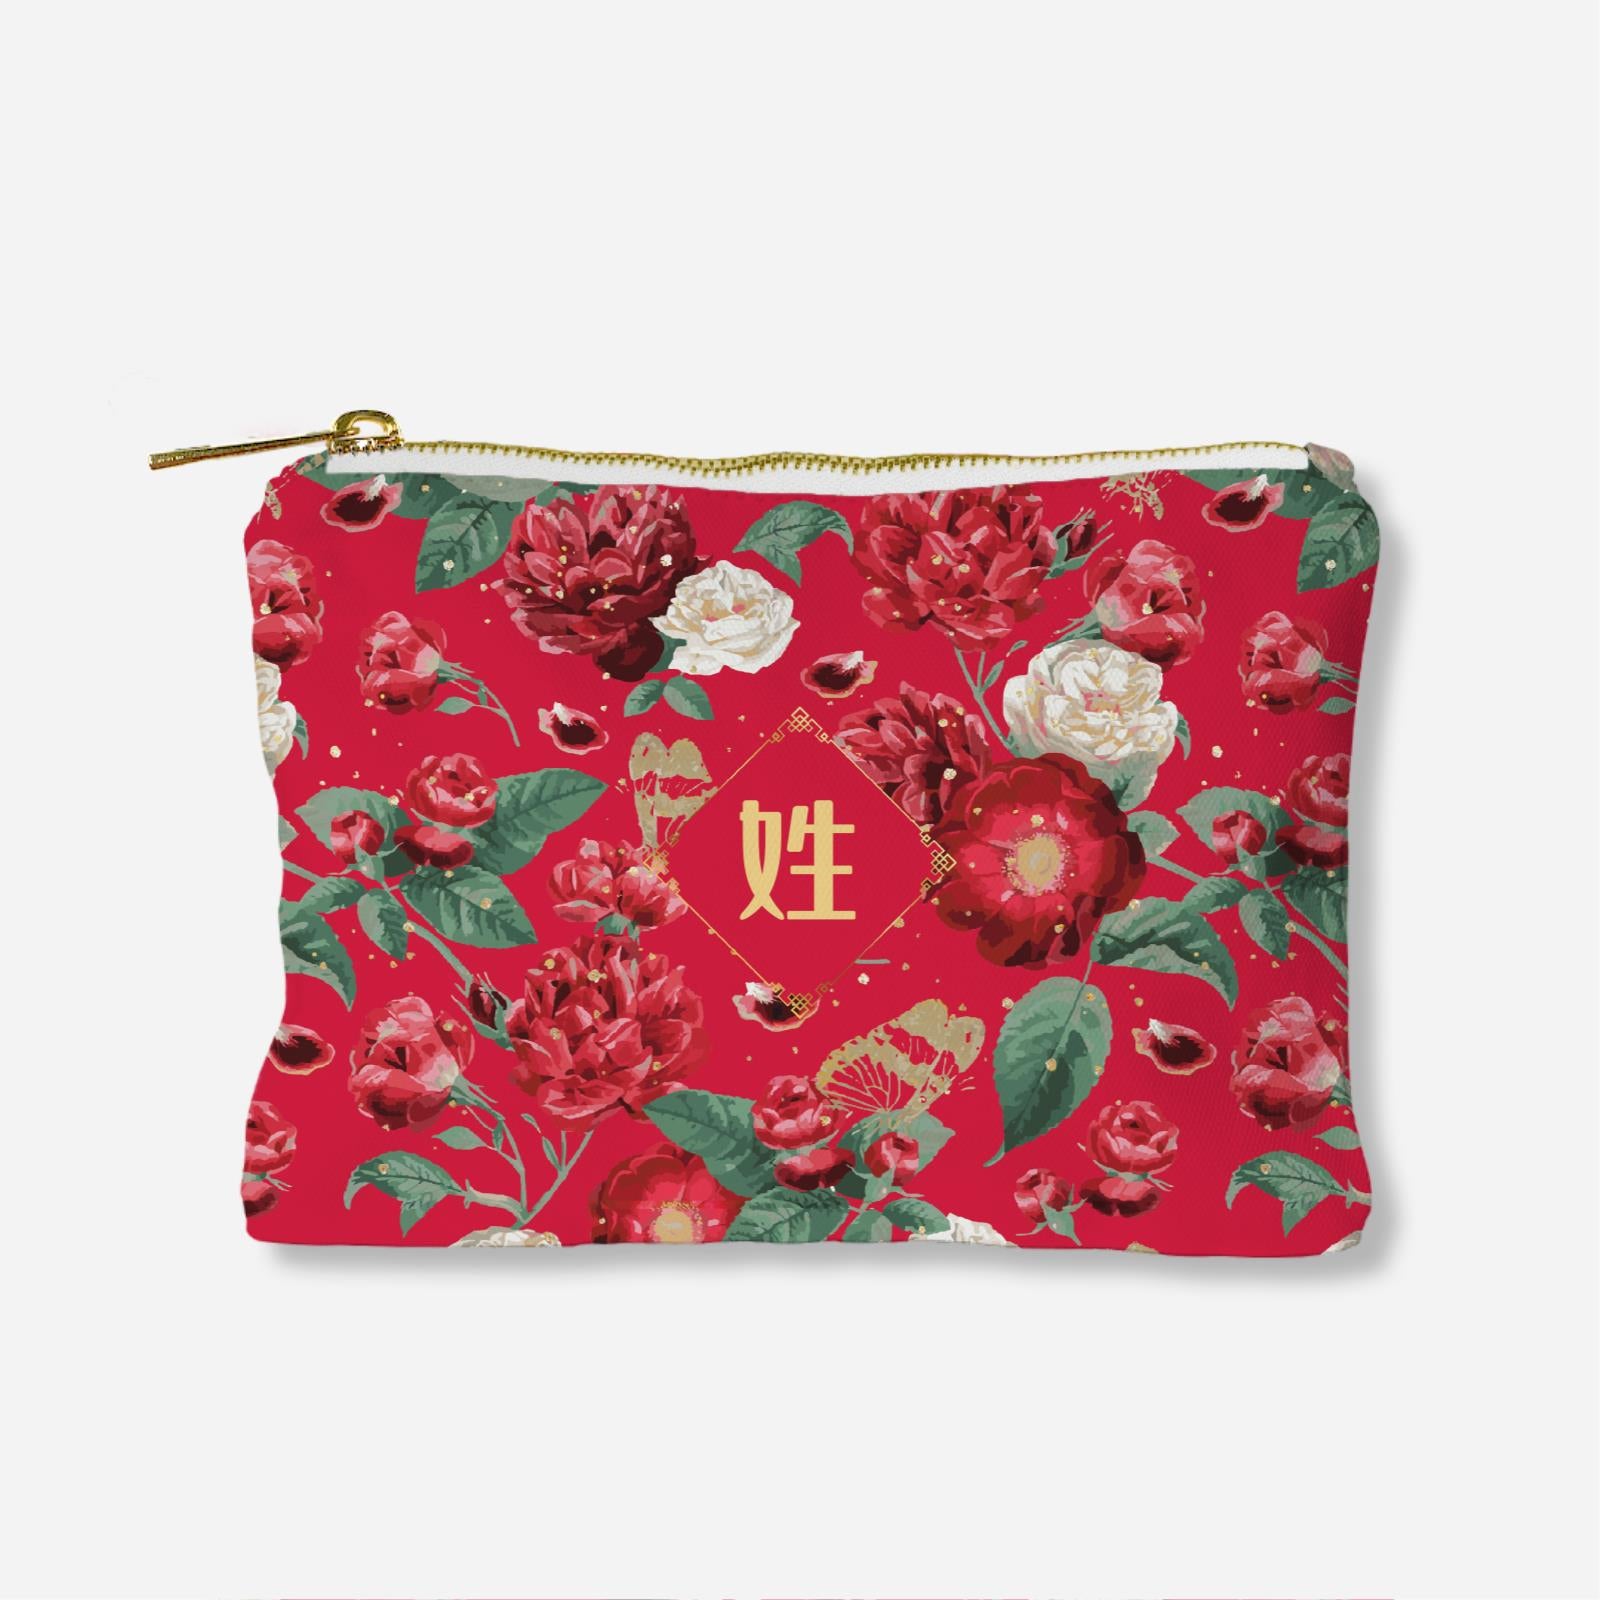 Royal Floral Series - Scorching Passion Full Print Zipper Pouch With Chinese Personalization